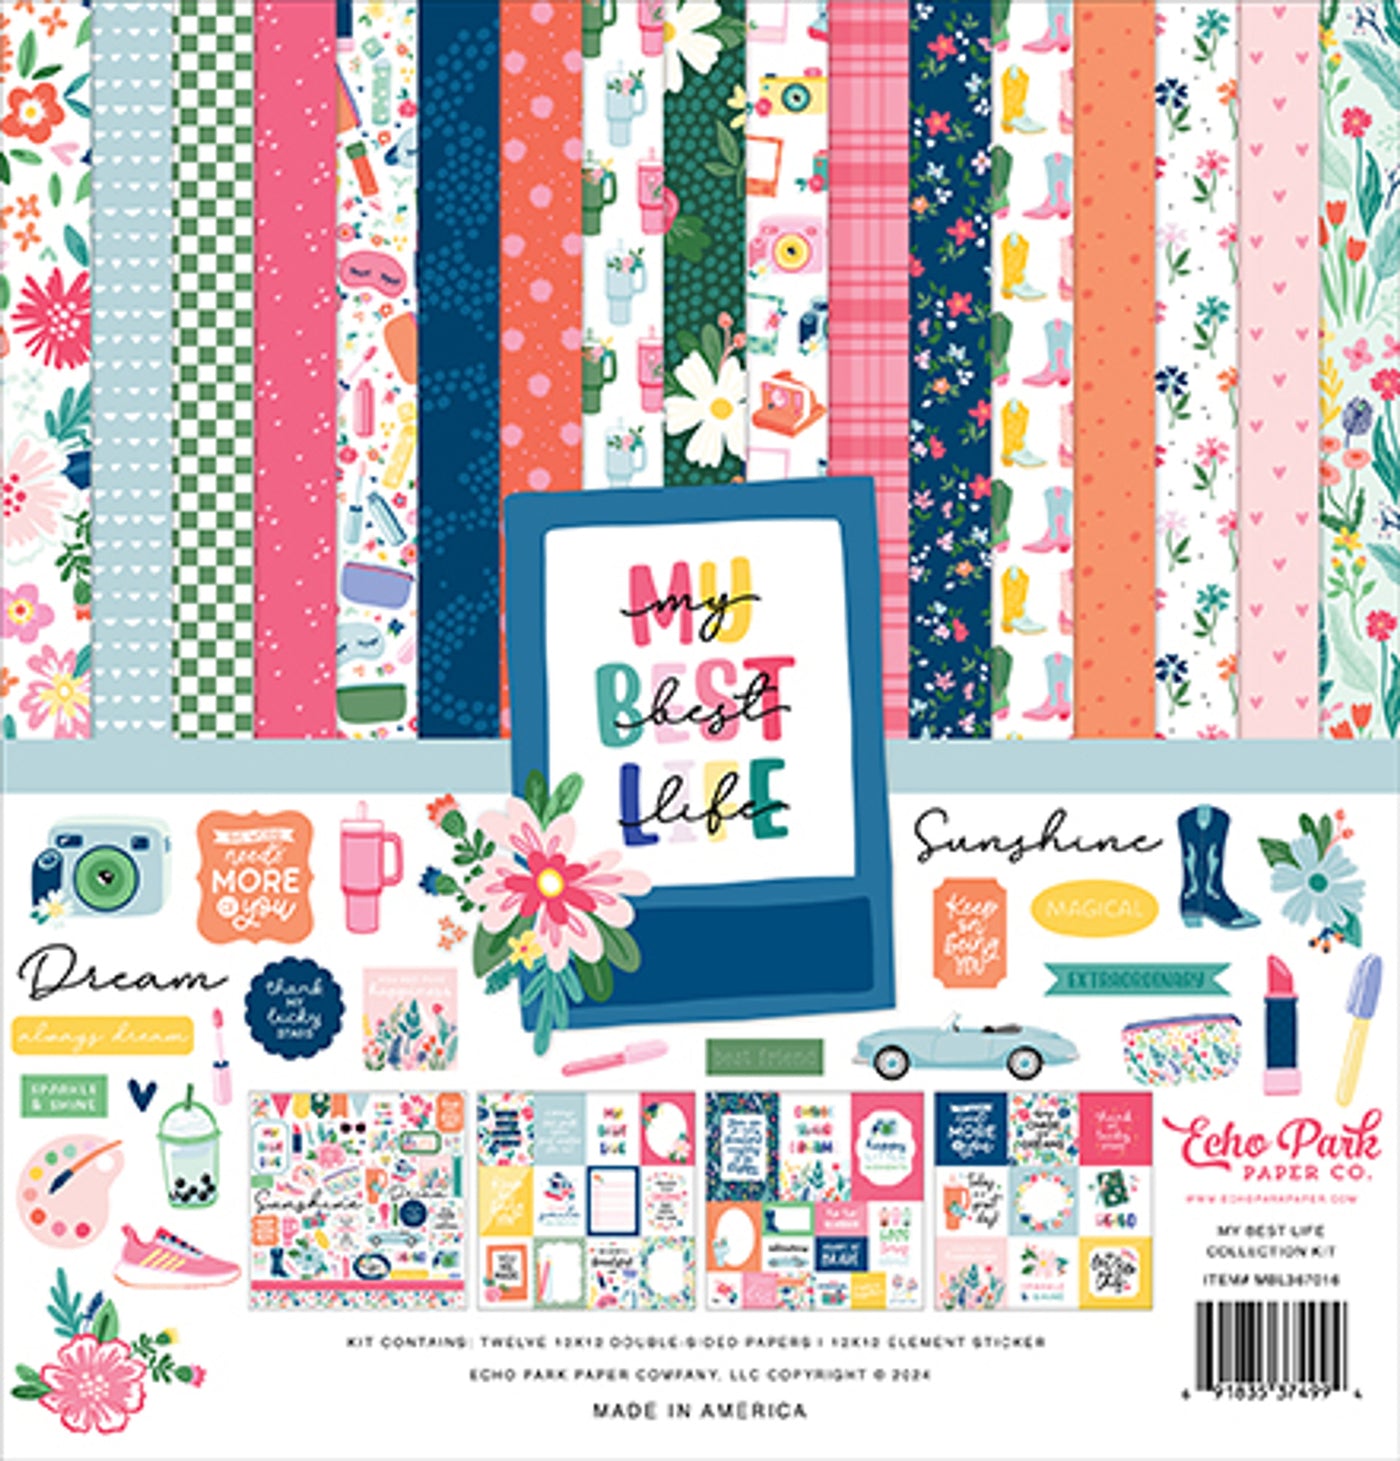 The MY BEST LIFE - 12x12 Collection Kit by Echo Park Paper is a must-have for all scrapbooking enthusiasts. This comprehensive kit includes 12 double-sided patterned papers, coordinating sticker sheets, and a variety of embellishments, providing endless creative possibilities.